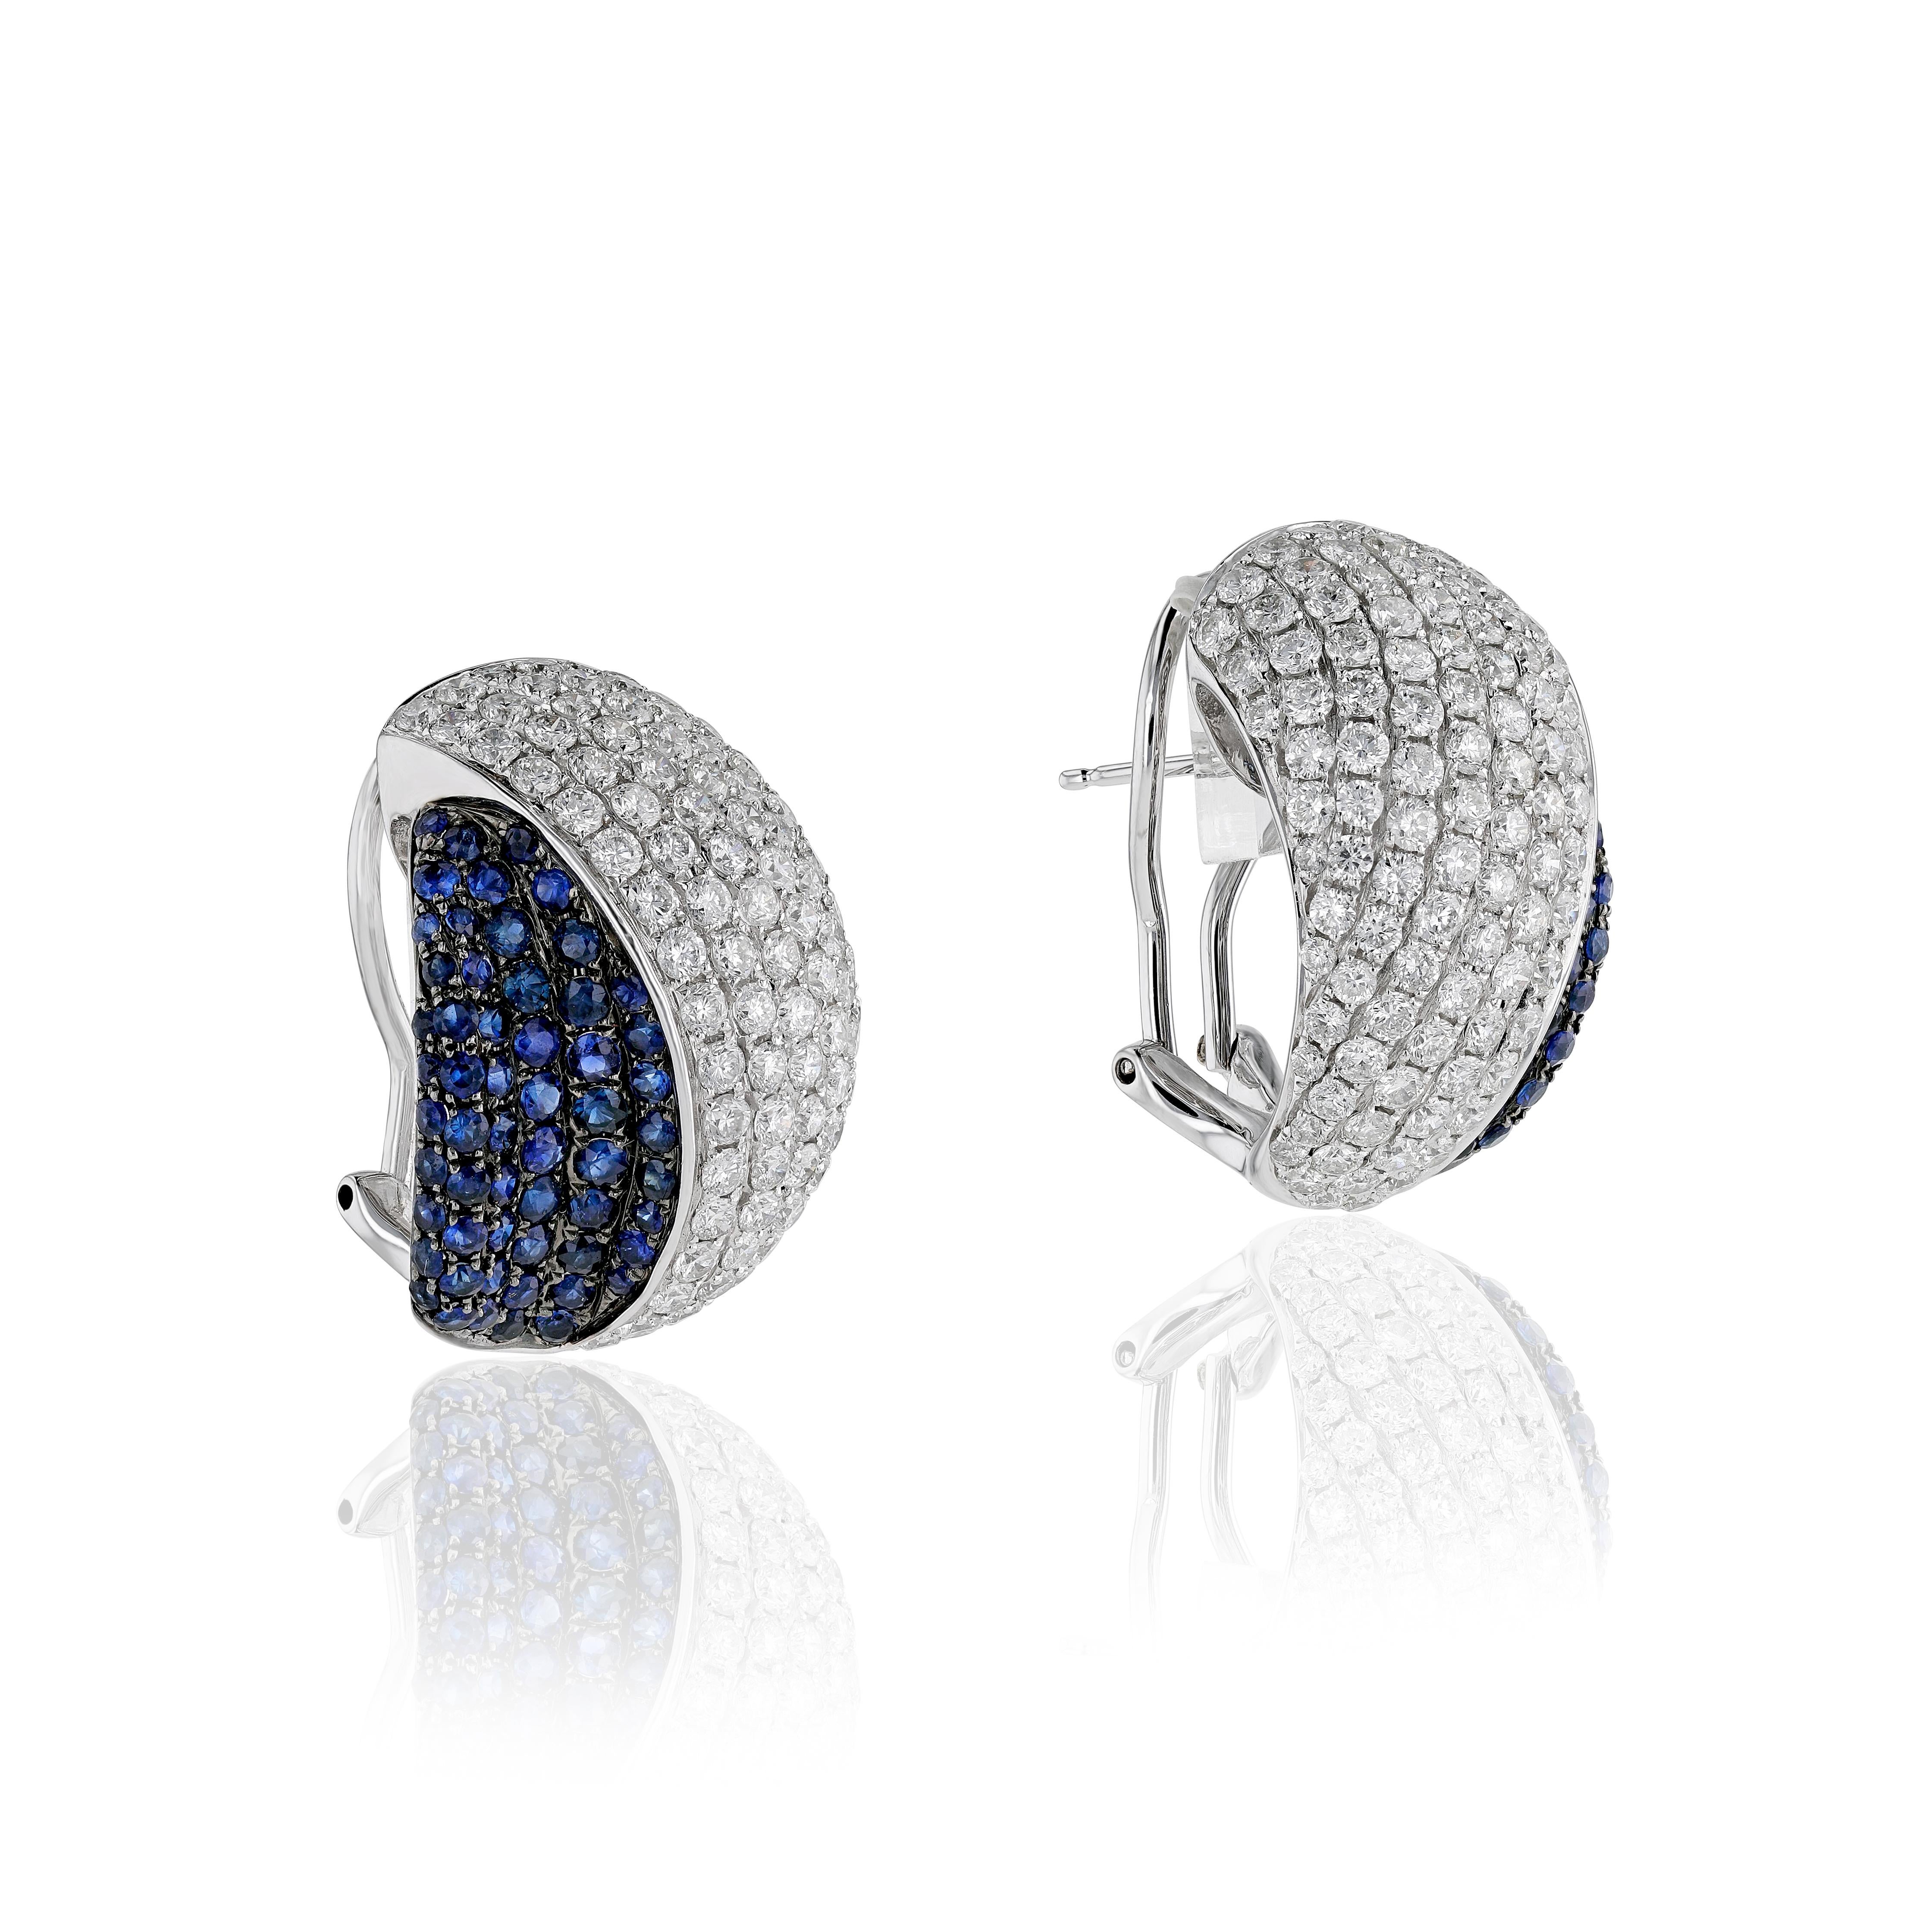 Fascinating rows of round cut diamonds are set by our master craftsmen to form seamless swirls of stones, emphasized by 2.64 ct rich blue round sapphires, in these vibrantly feminine 18 karat white gold semi-circle earrings.
Diamonds (Total Carat